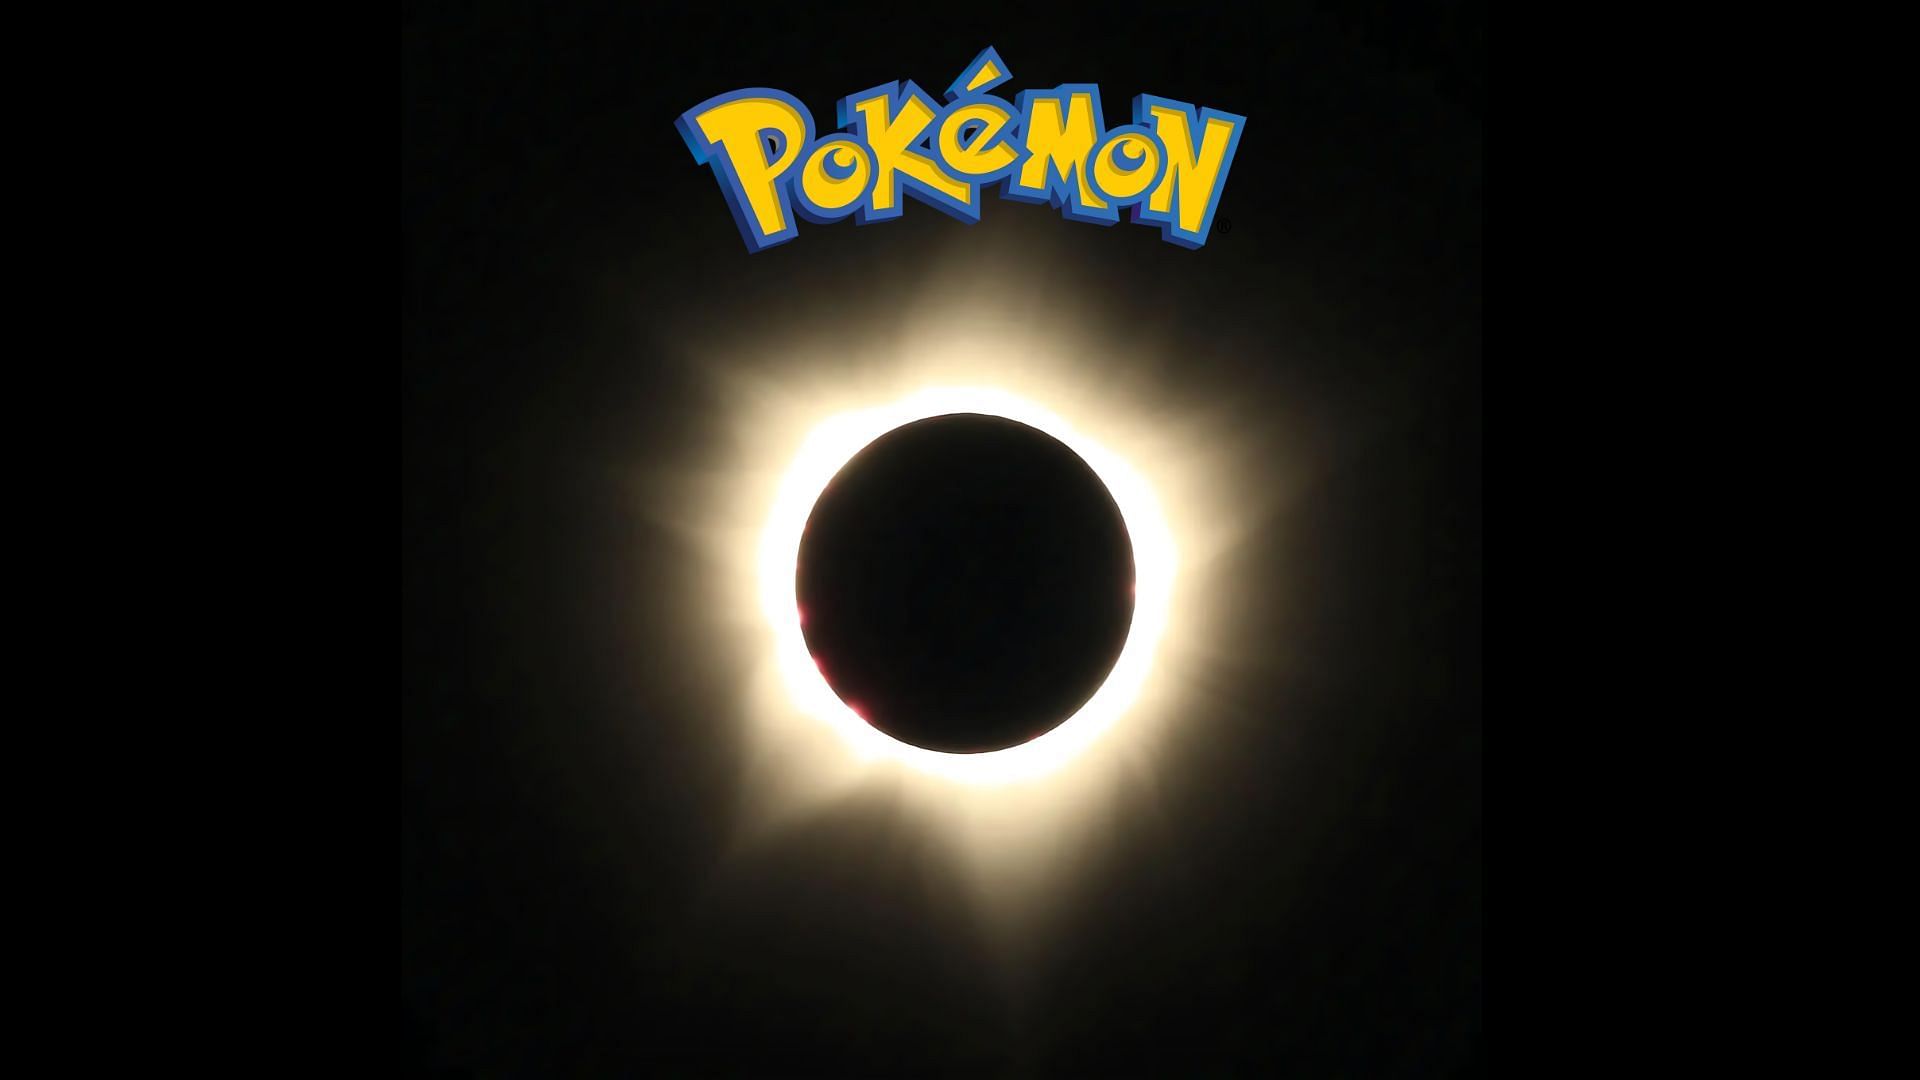 Viral clip gives a Pokemon twist to upcoming solar eclipse